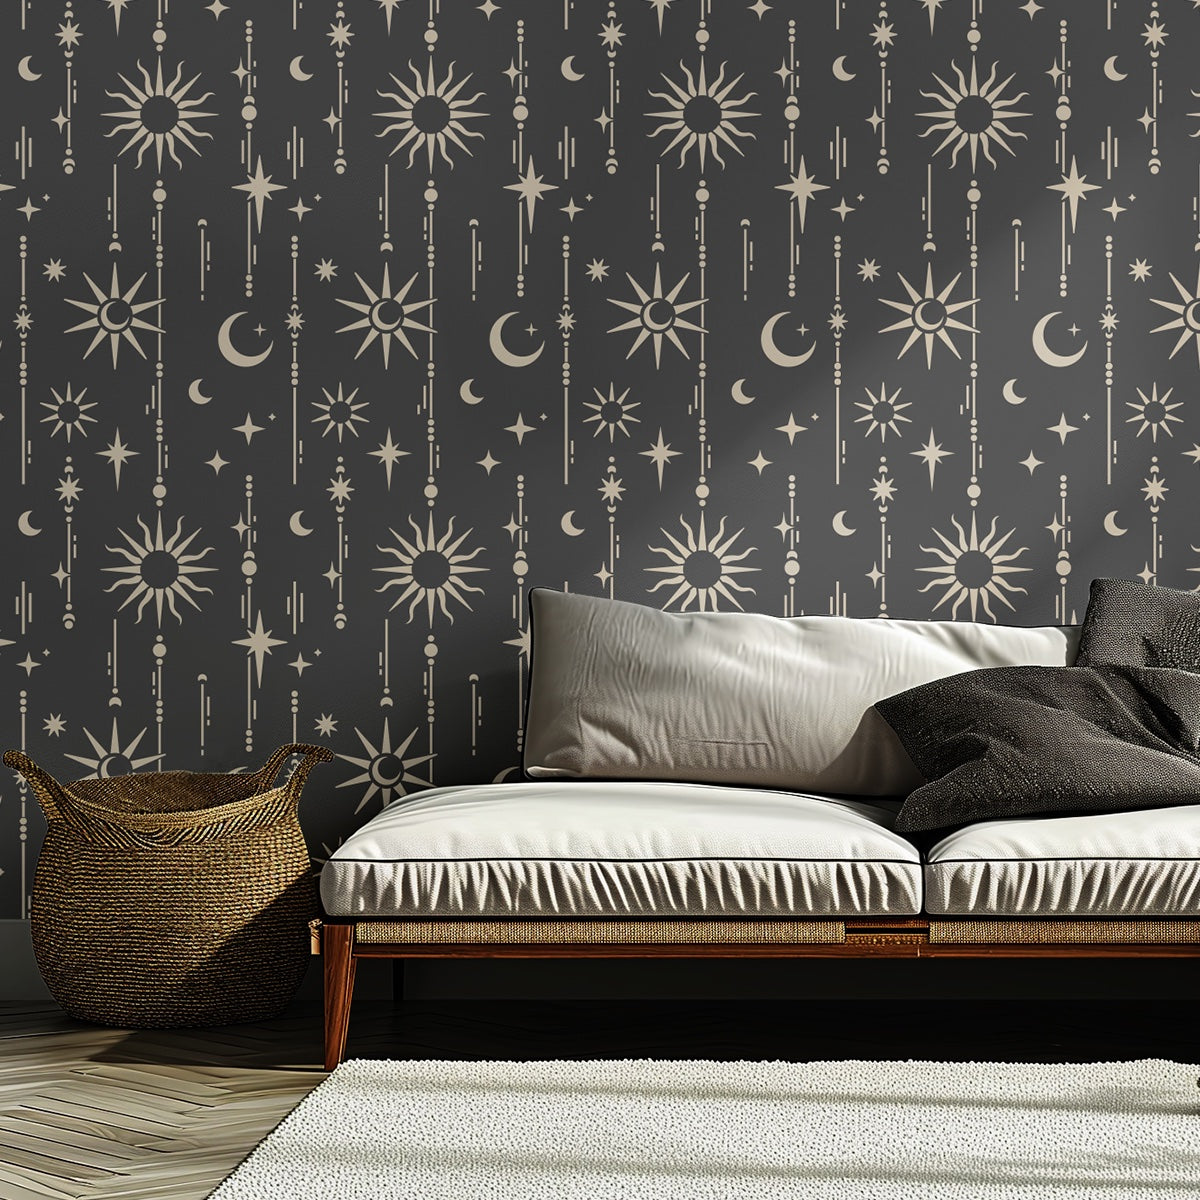 Celestial wallpaper look with moon and stars wall stencils